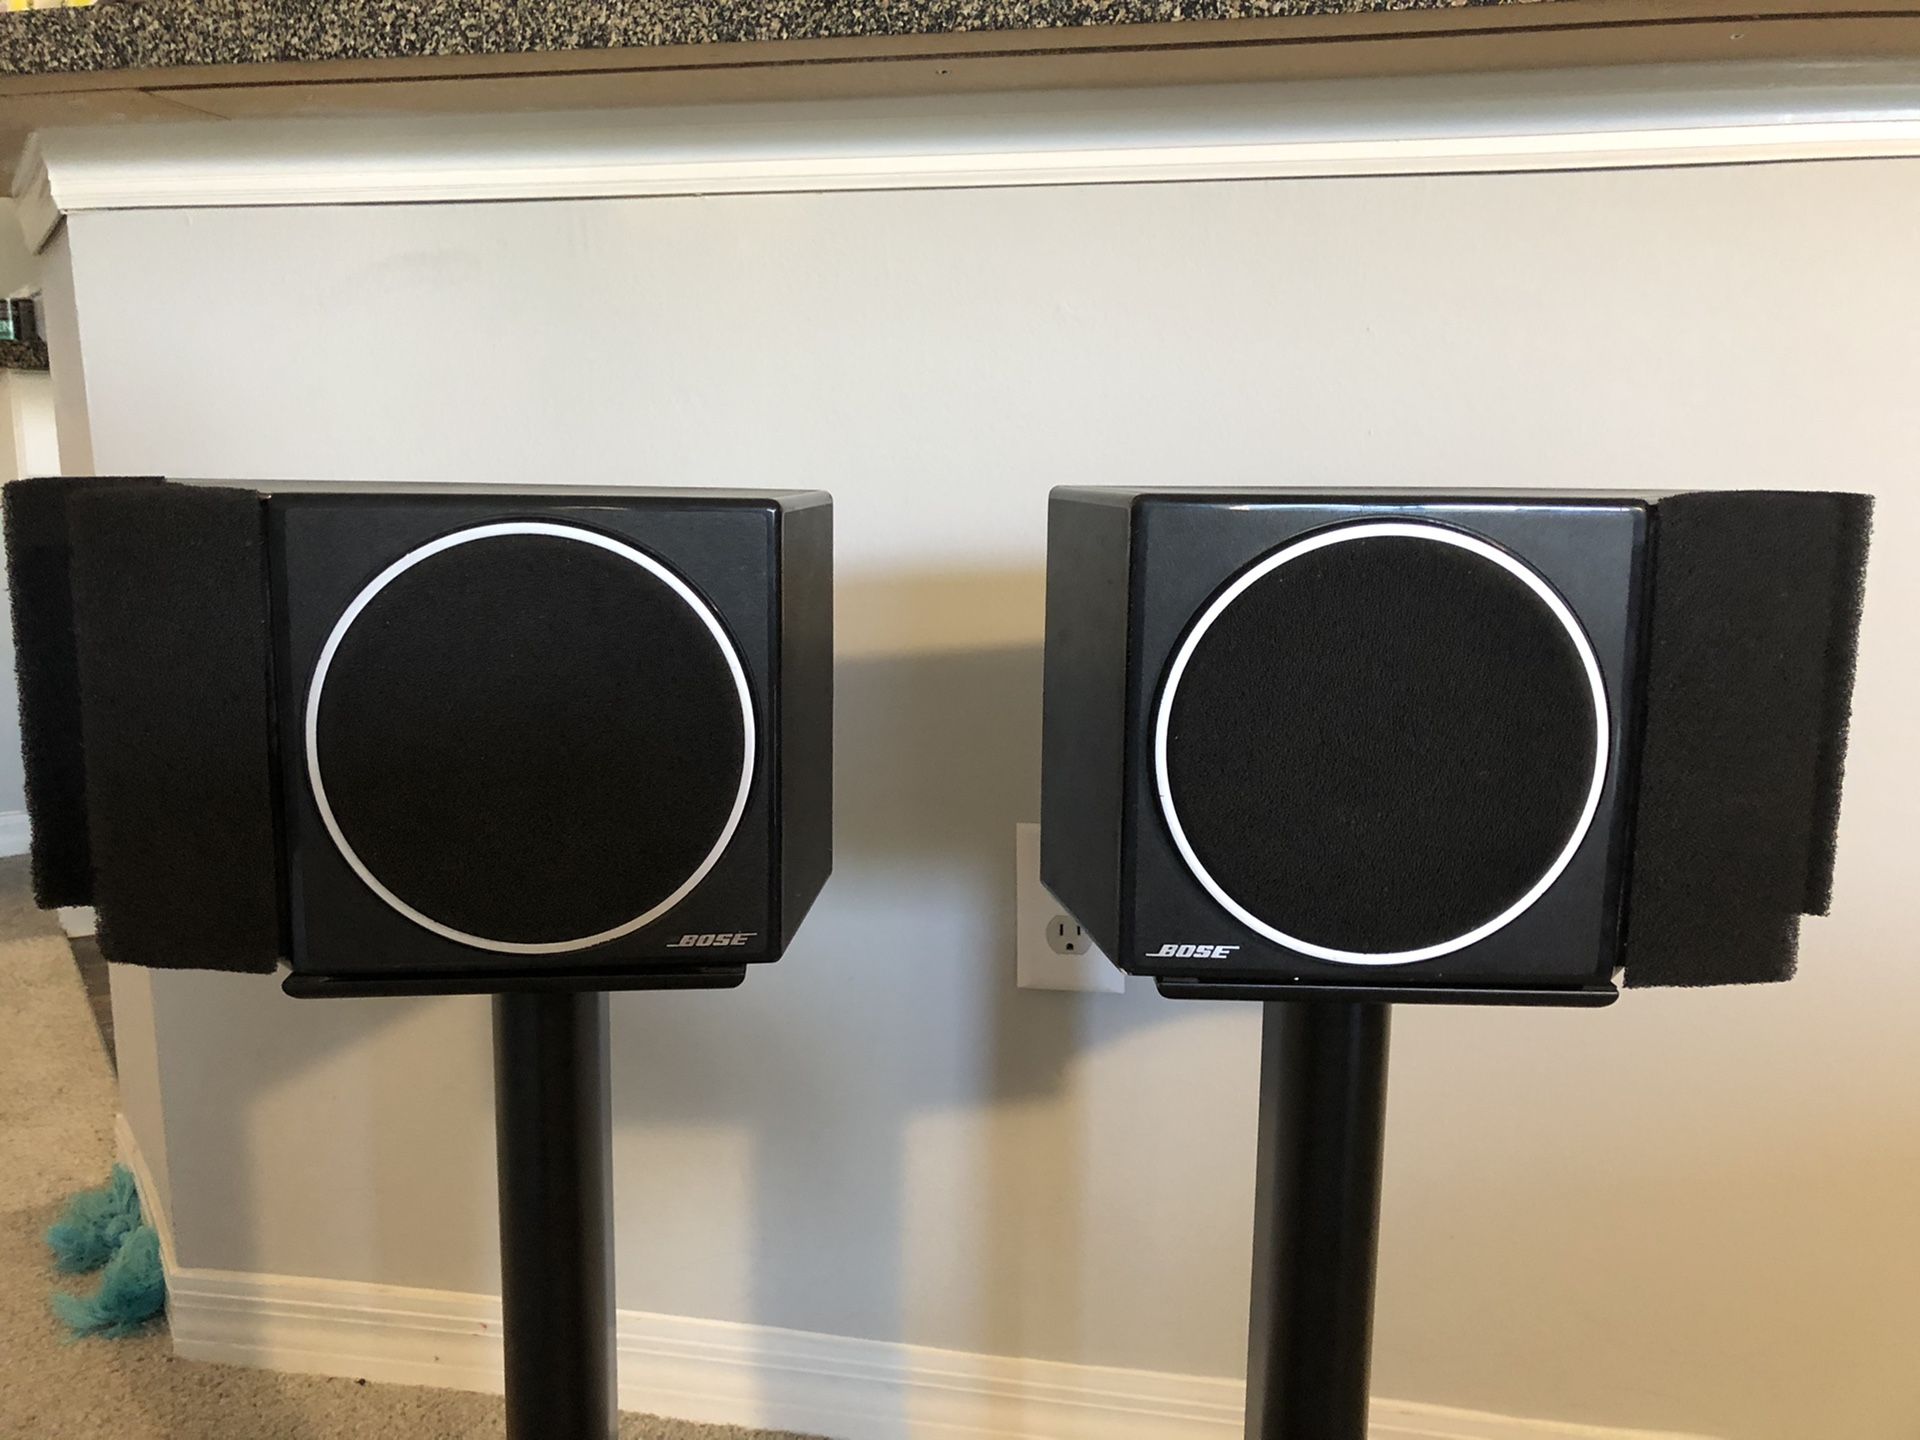 Very rare find. Bose 201 Series I / Series 1 speakers - 1982 Vintage speakers in excellent condition. A must have for any Bose audiophile enthusias